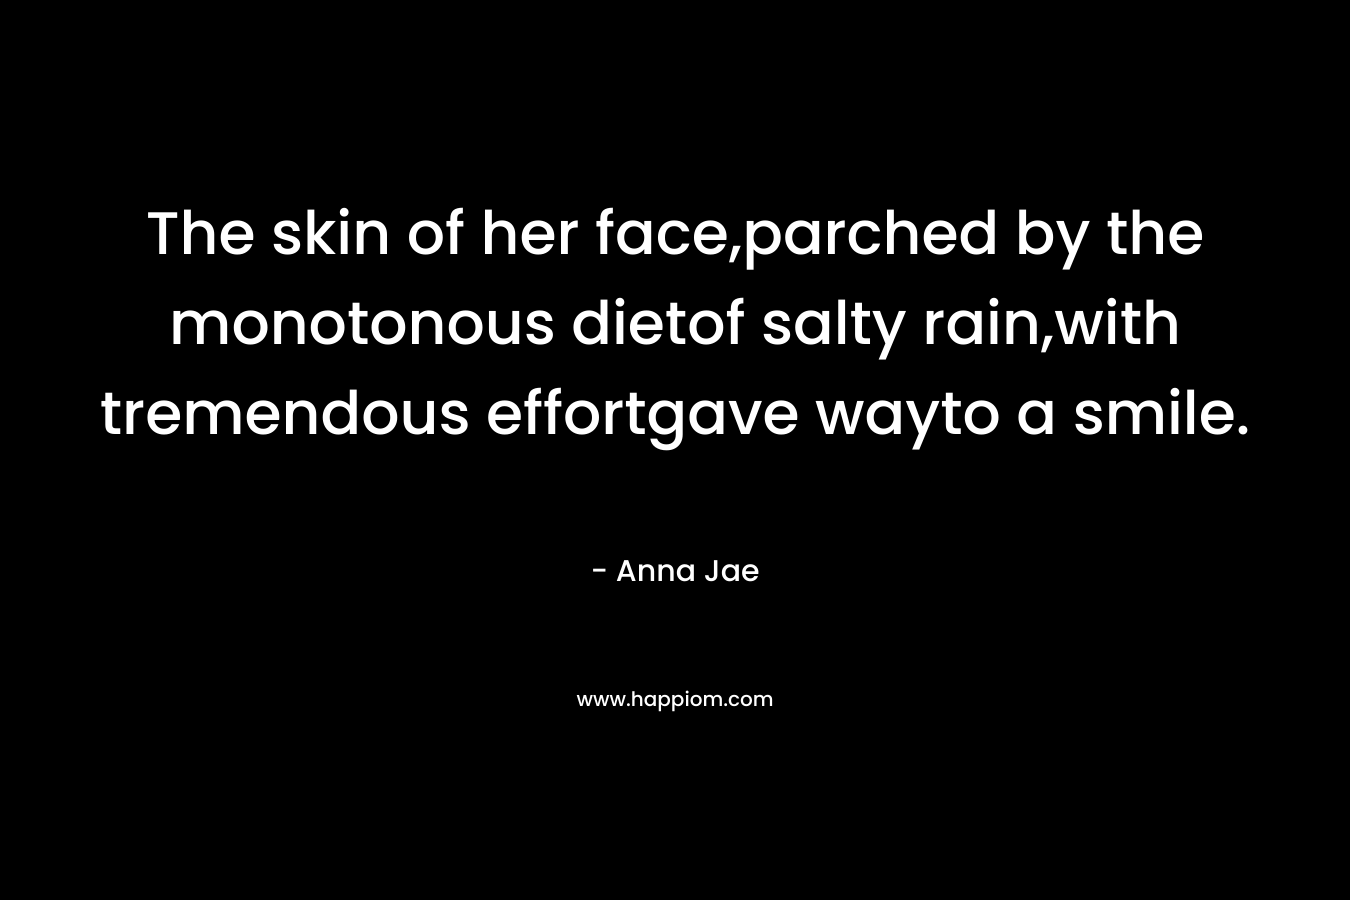 The skin of her face,parched by the monotonous dietof salty rain,with tremendous effortgave wayto a smile. – Anna Jae